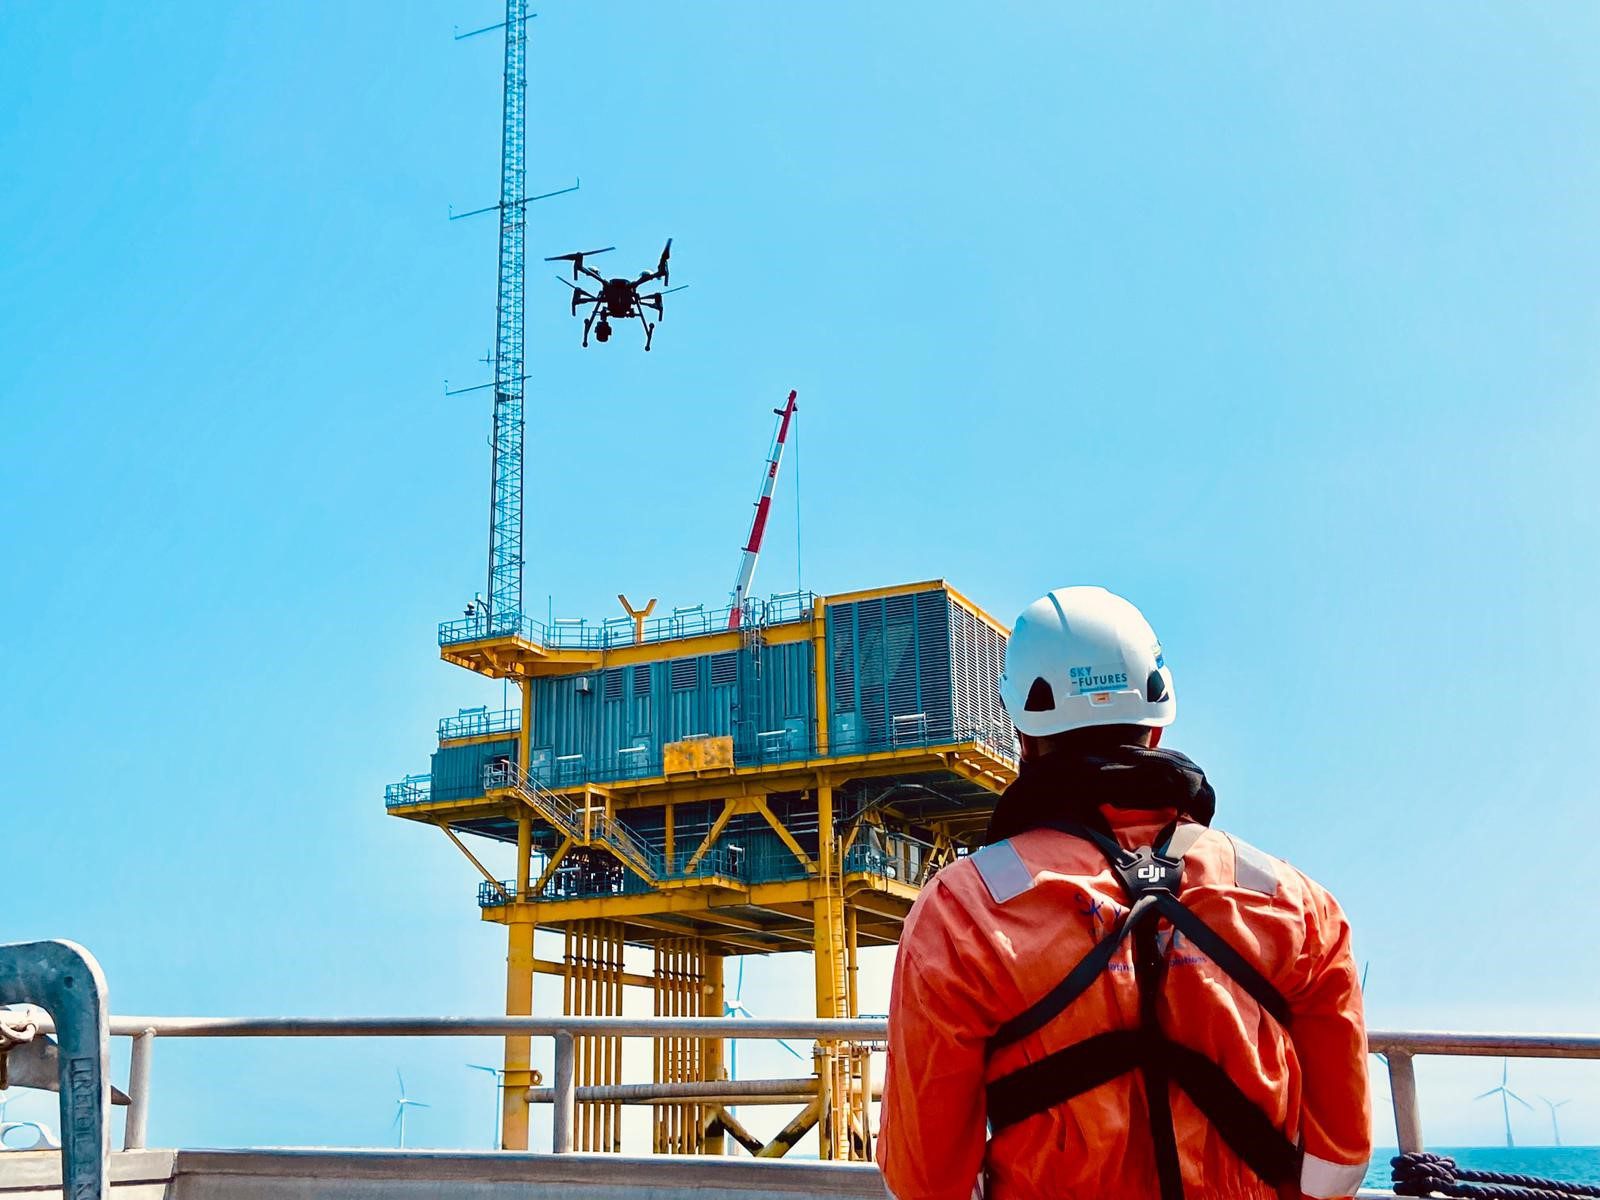 Drone inspecting substation offshore with pilot in foreground